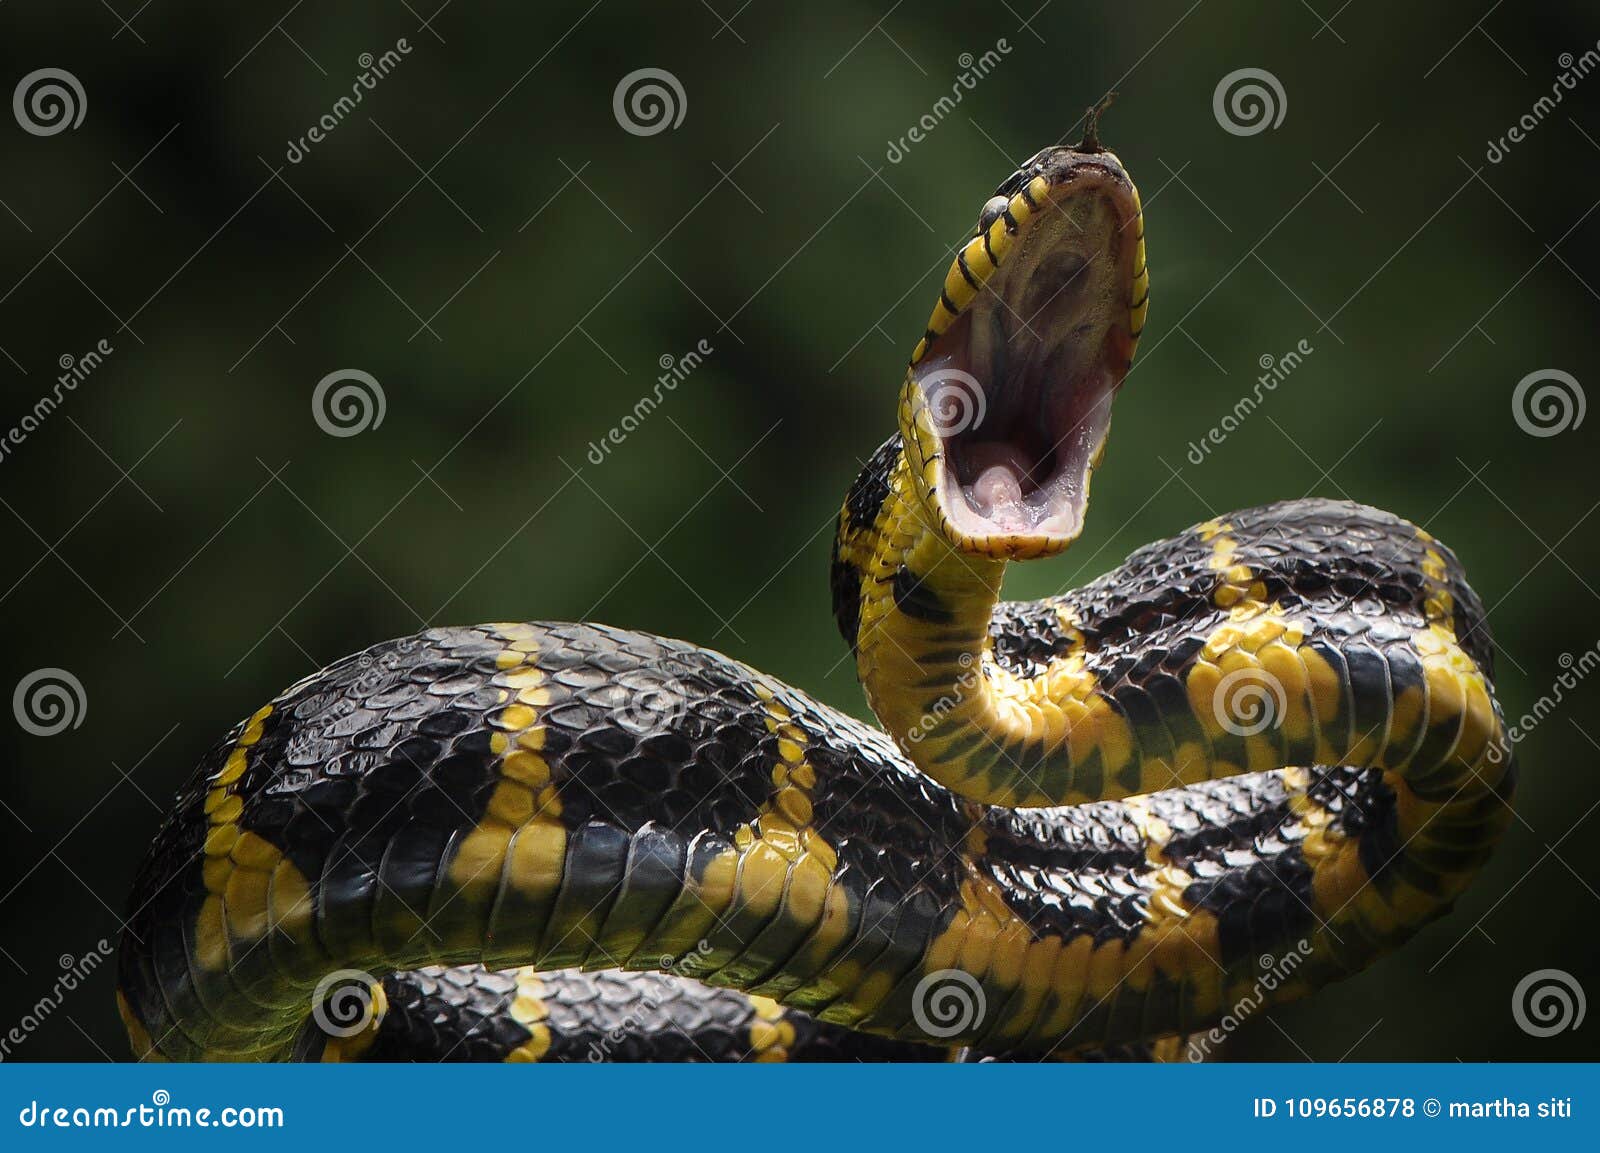 snakes attack the prey